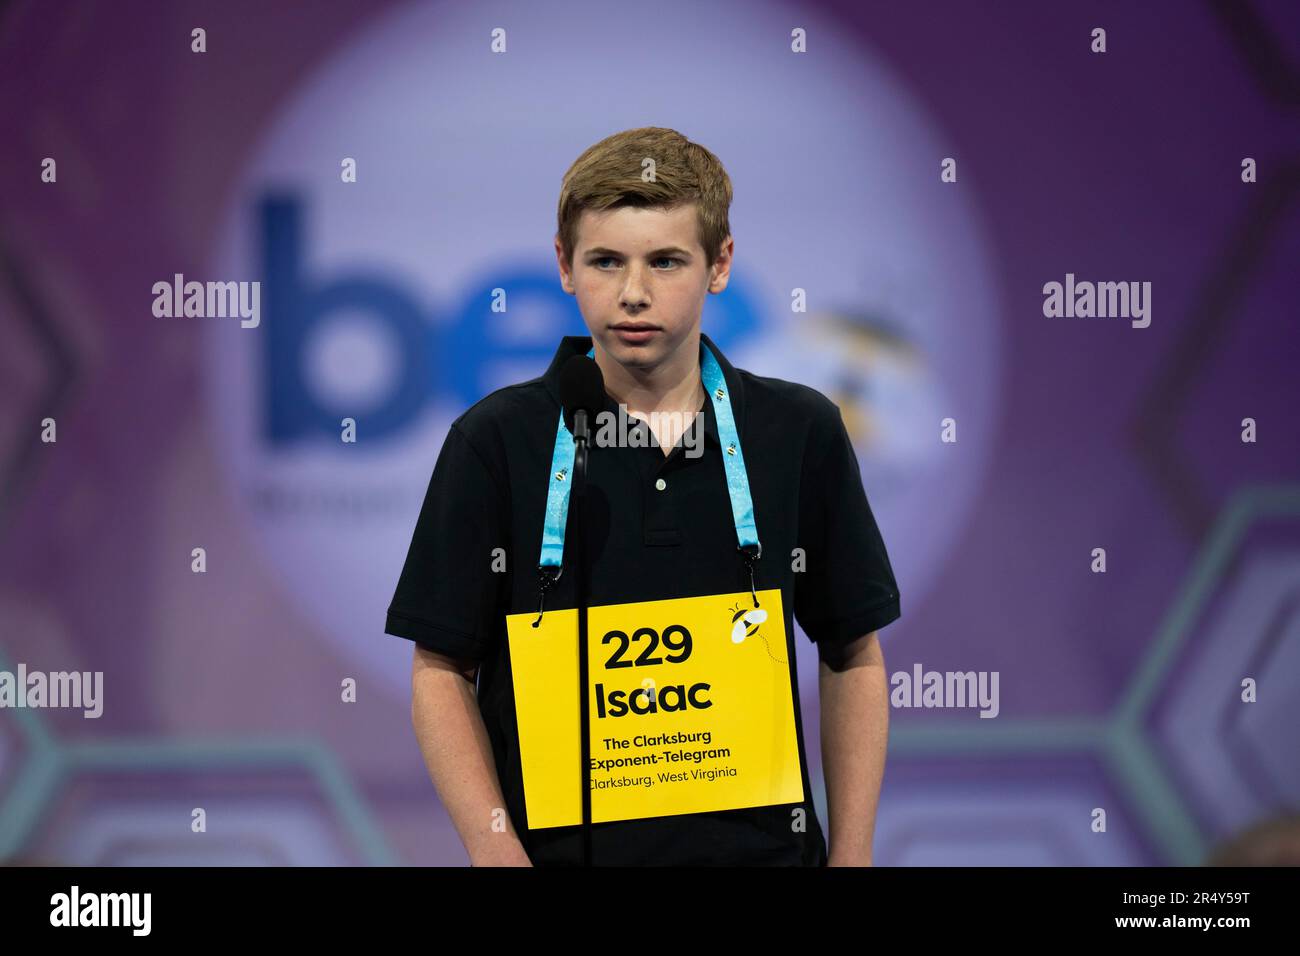 Cupola for the win. Harrison County's Isaac Boyce clinches regional  spelling bee, Local News